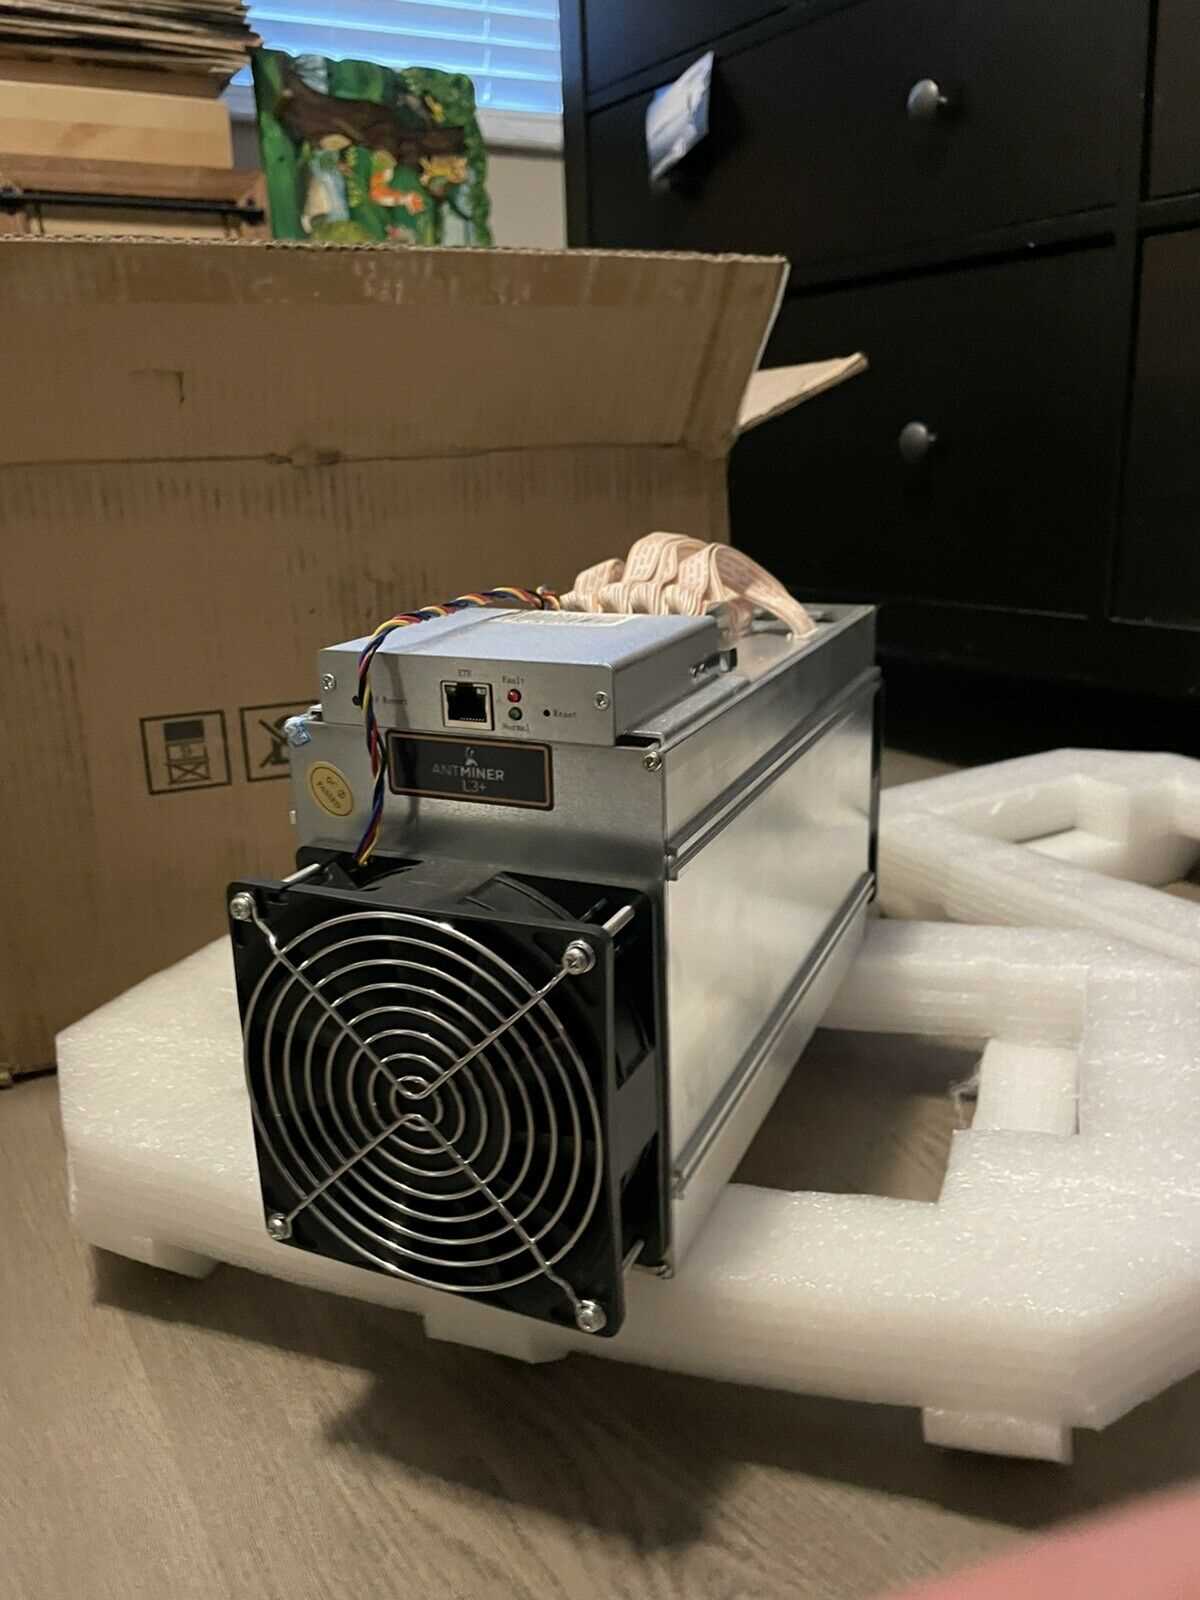 BRAND NEW Bitmain Antminer L3+ with APW3++ Power Supply, Scrypt 504 MH/s SCRYPT